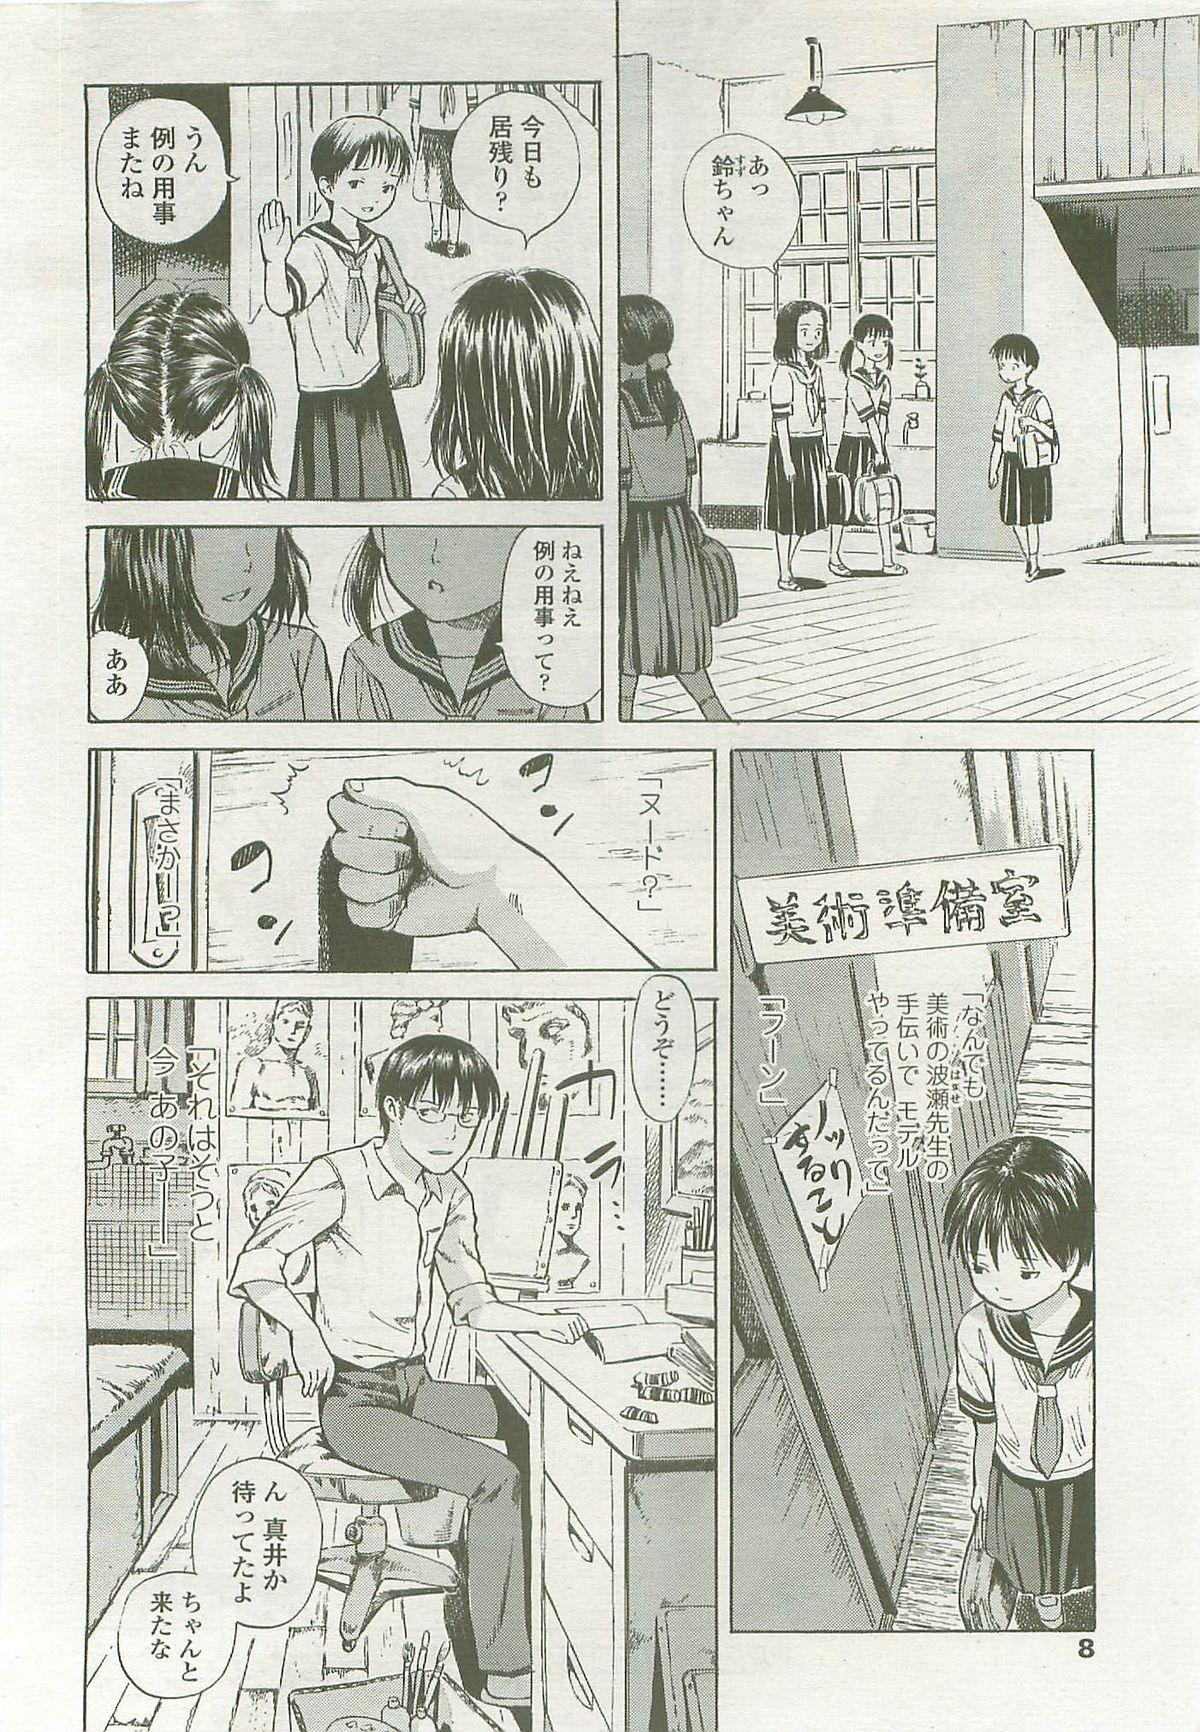 Sis Comic LO 2007-10 Vol. 43 Transsexual - Page 8